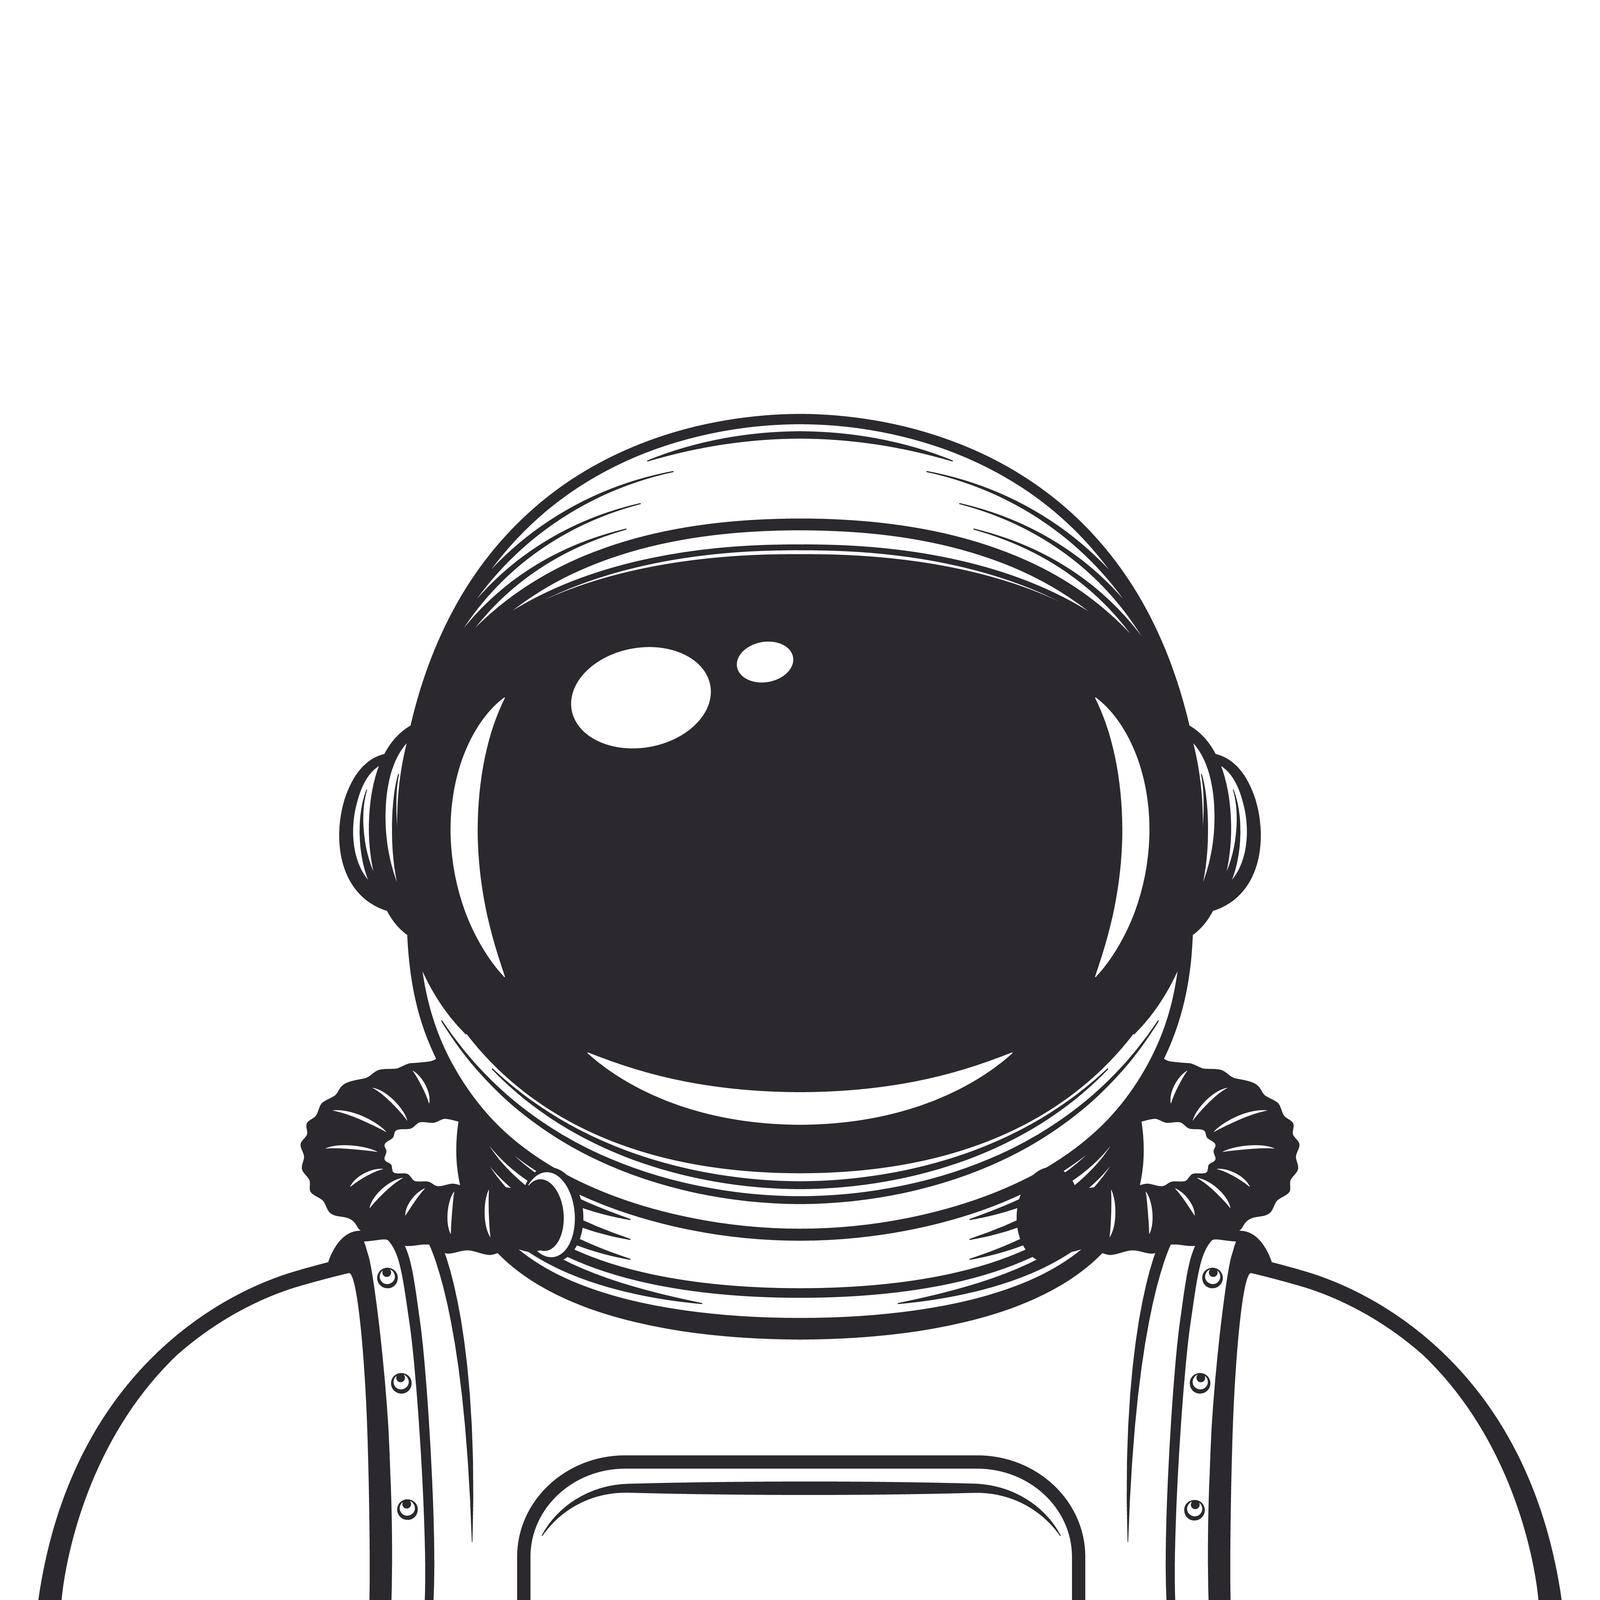 Vector Astronaut Suit, Helmet, Black and White Monochrome Cosmonaut Mask for Space Exploration Isolated. Suit for Spaceman Protection. Space Helmet Design Template.